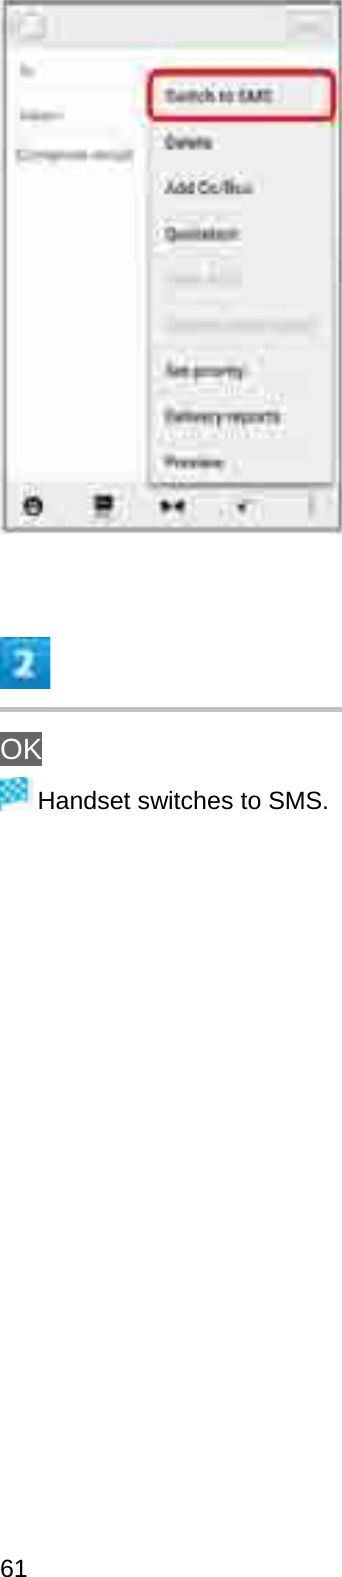 OKHandset switches to SMS.61